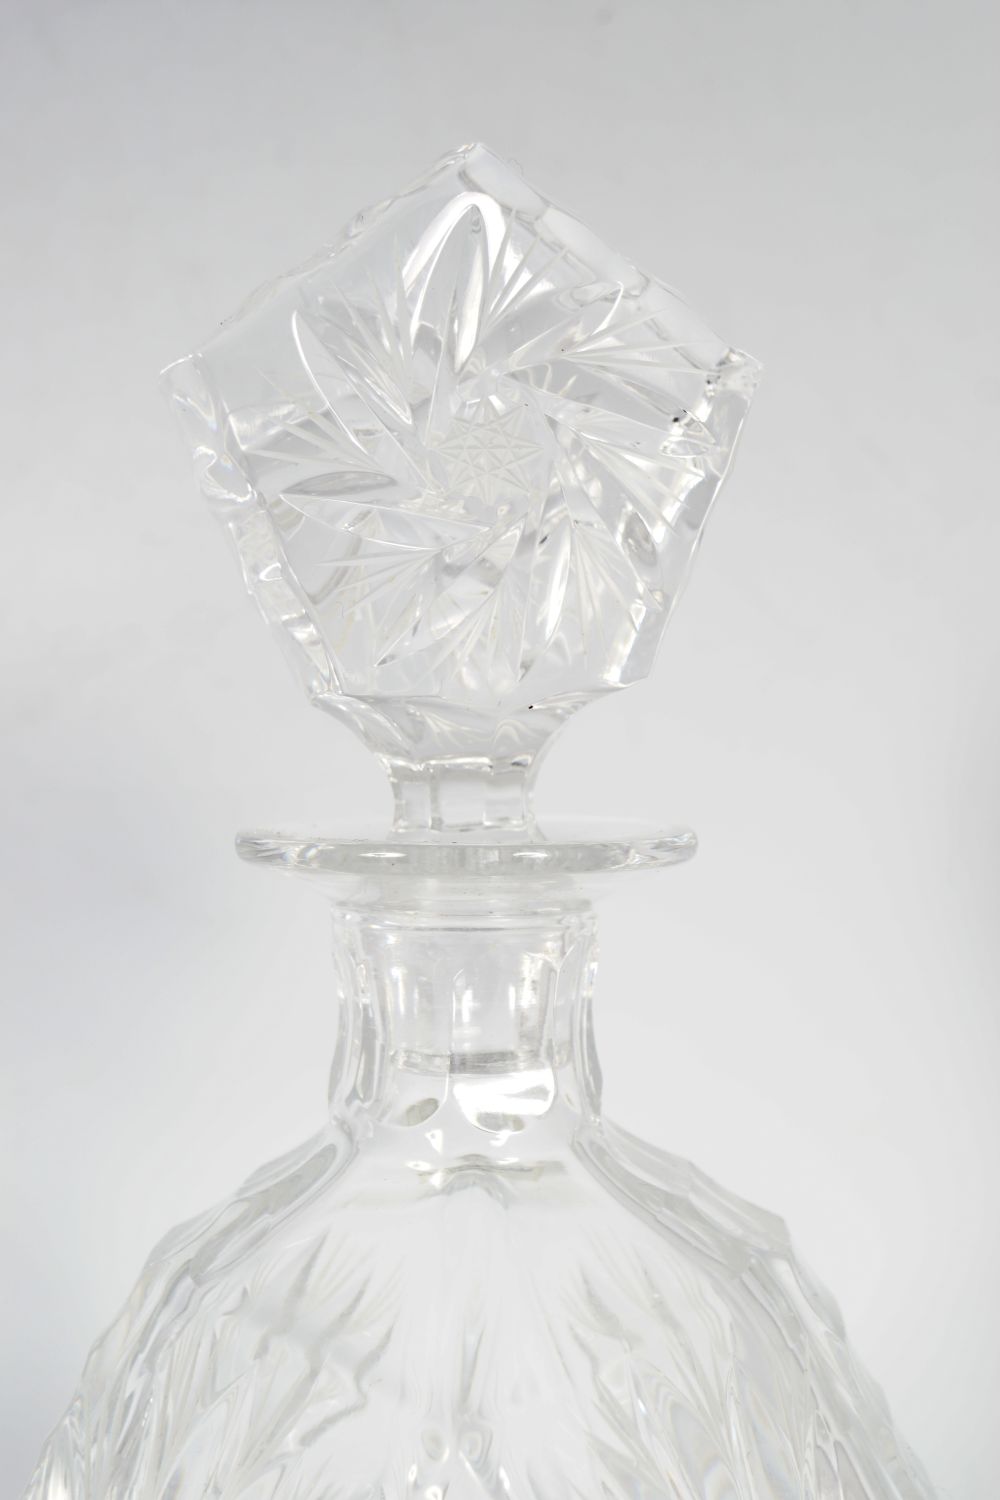 PAIR OF HEAVY CRYSTAL SHIP DECANTERS - Image 2 of 2